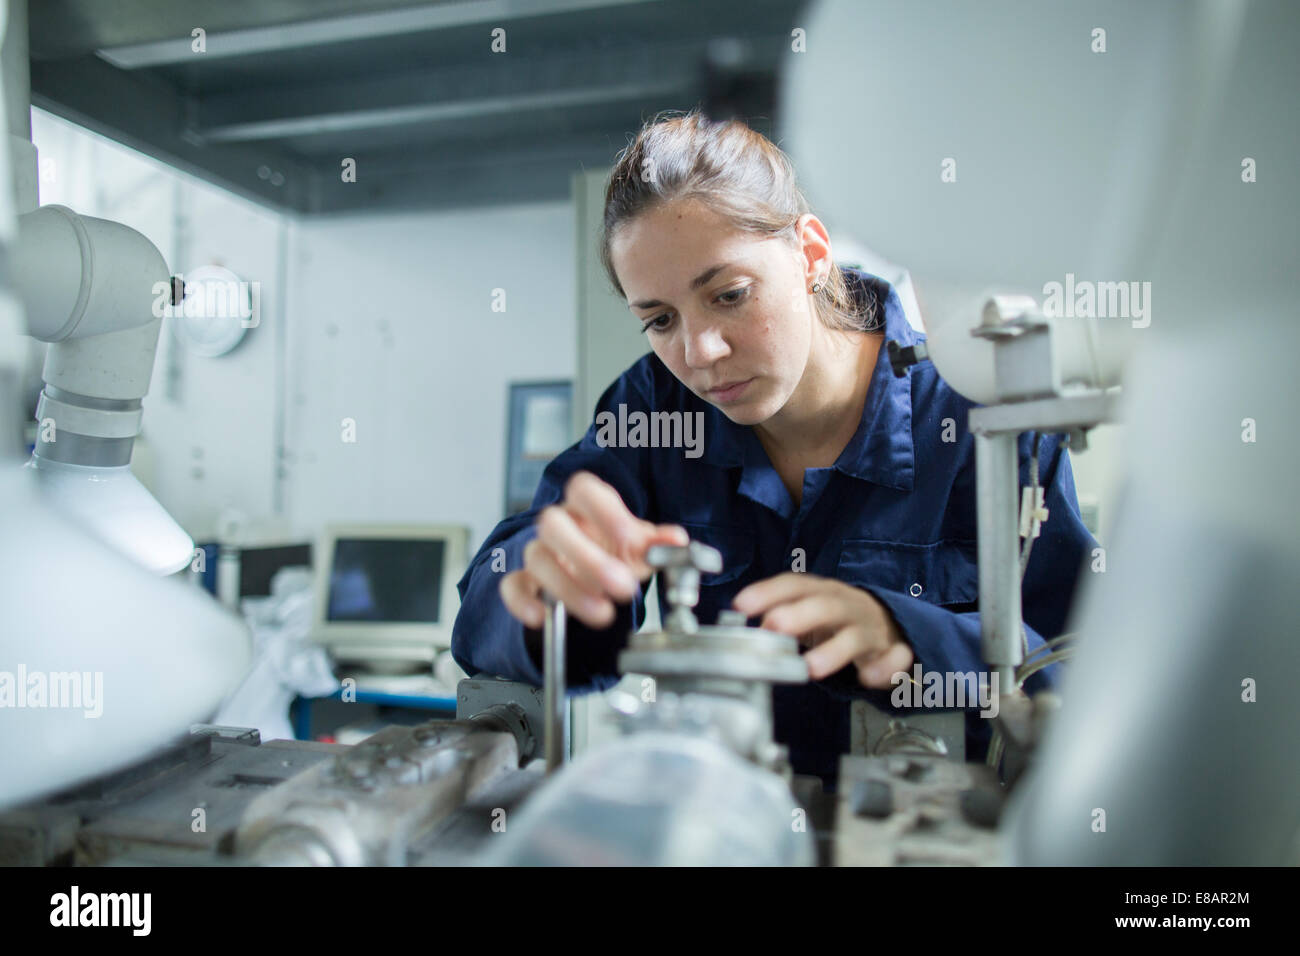 Female engineer turning valves on factory industrial piping Stock Photo